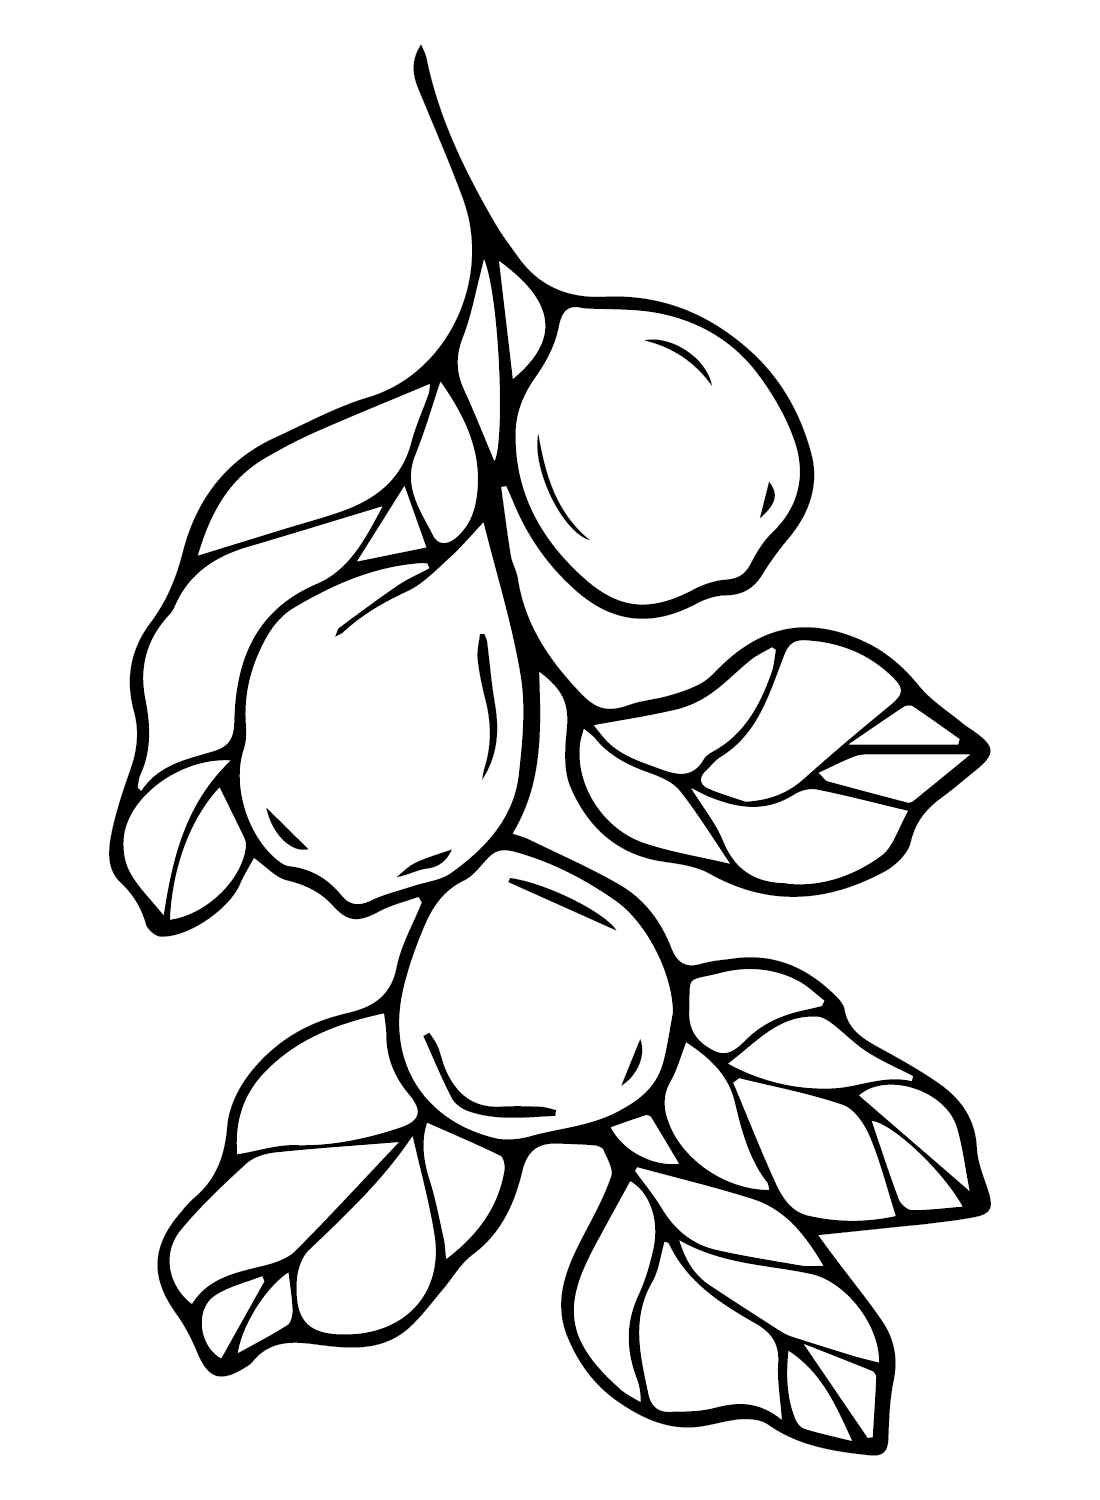 Guava Branch Coloring Page